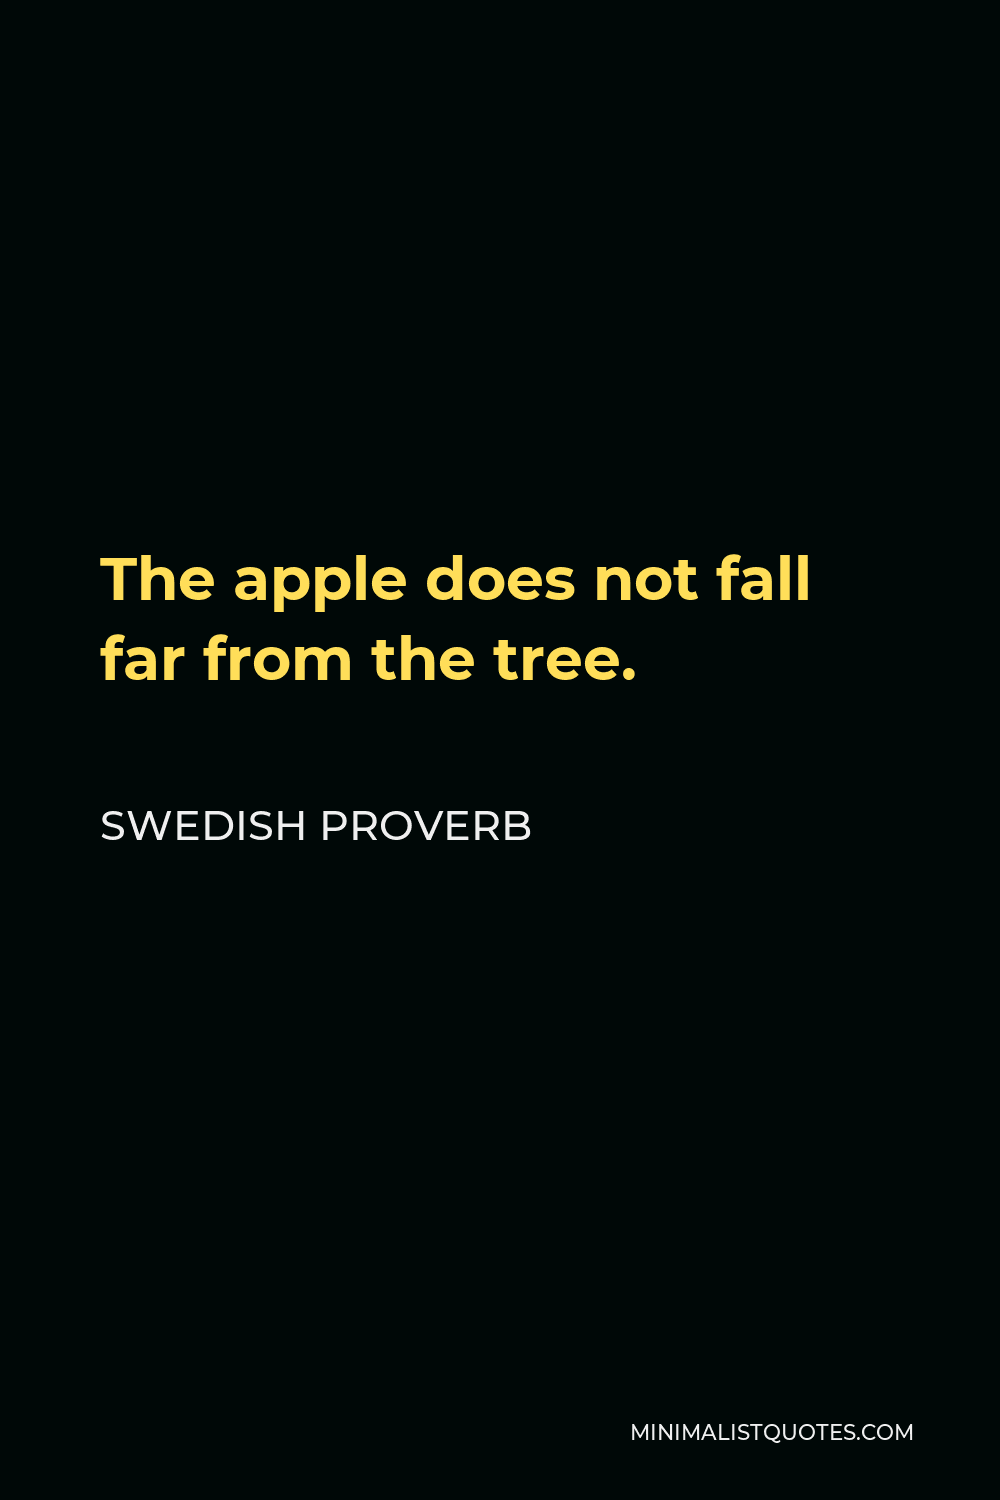 Swedish Proverb Quote - The apple does not fall far from the tree.